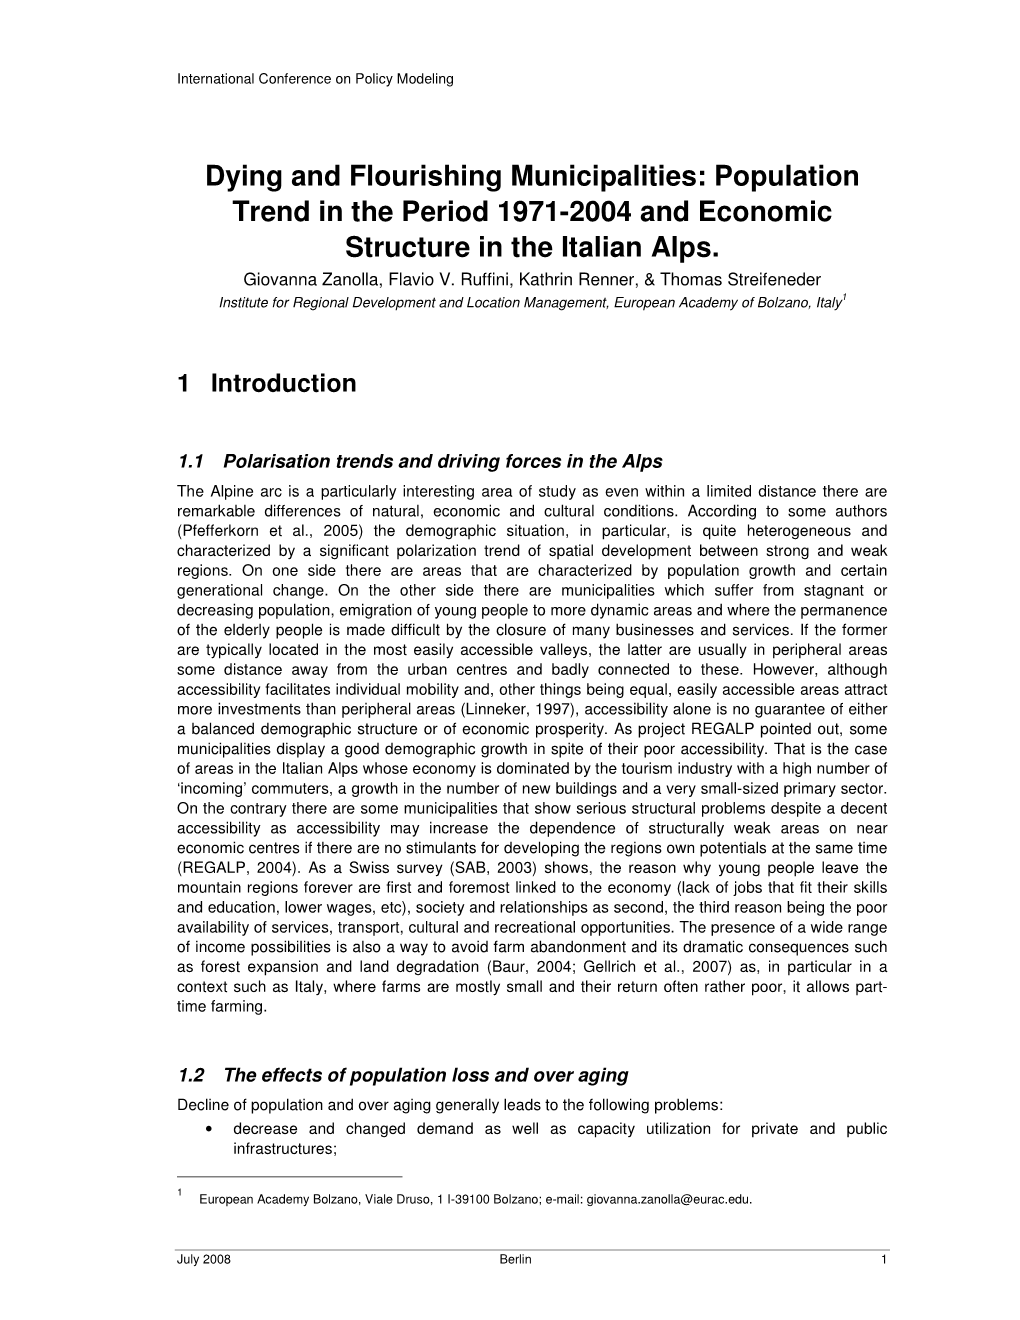 Dying and Flourishing Municipalities: Population Trend in the Period 1971-2004 and Economic Structure in the Italian Alps